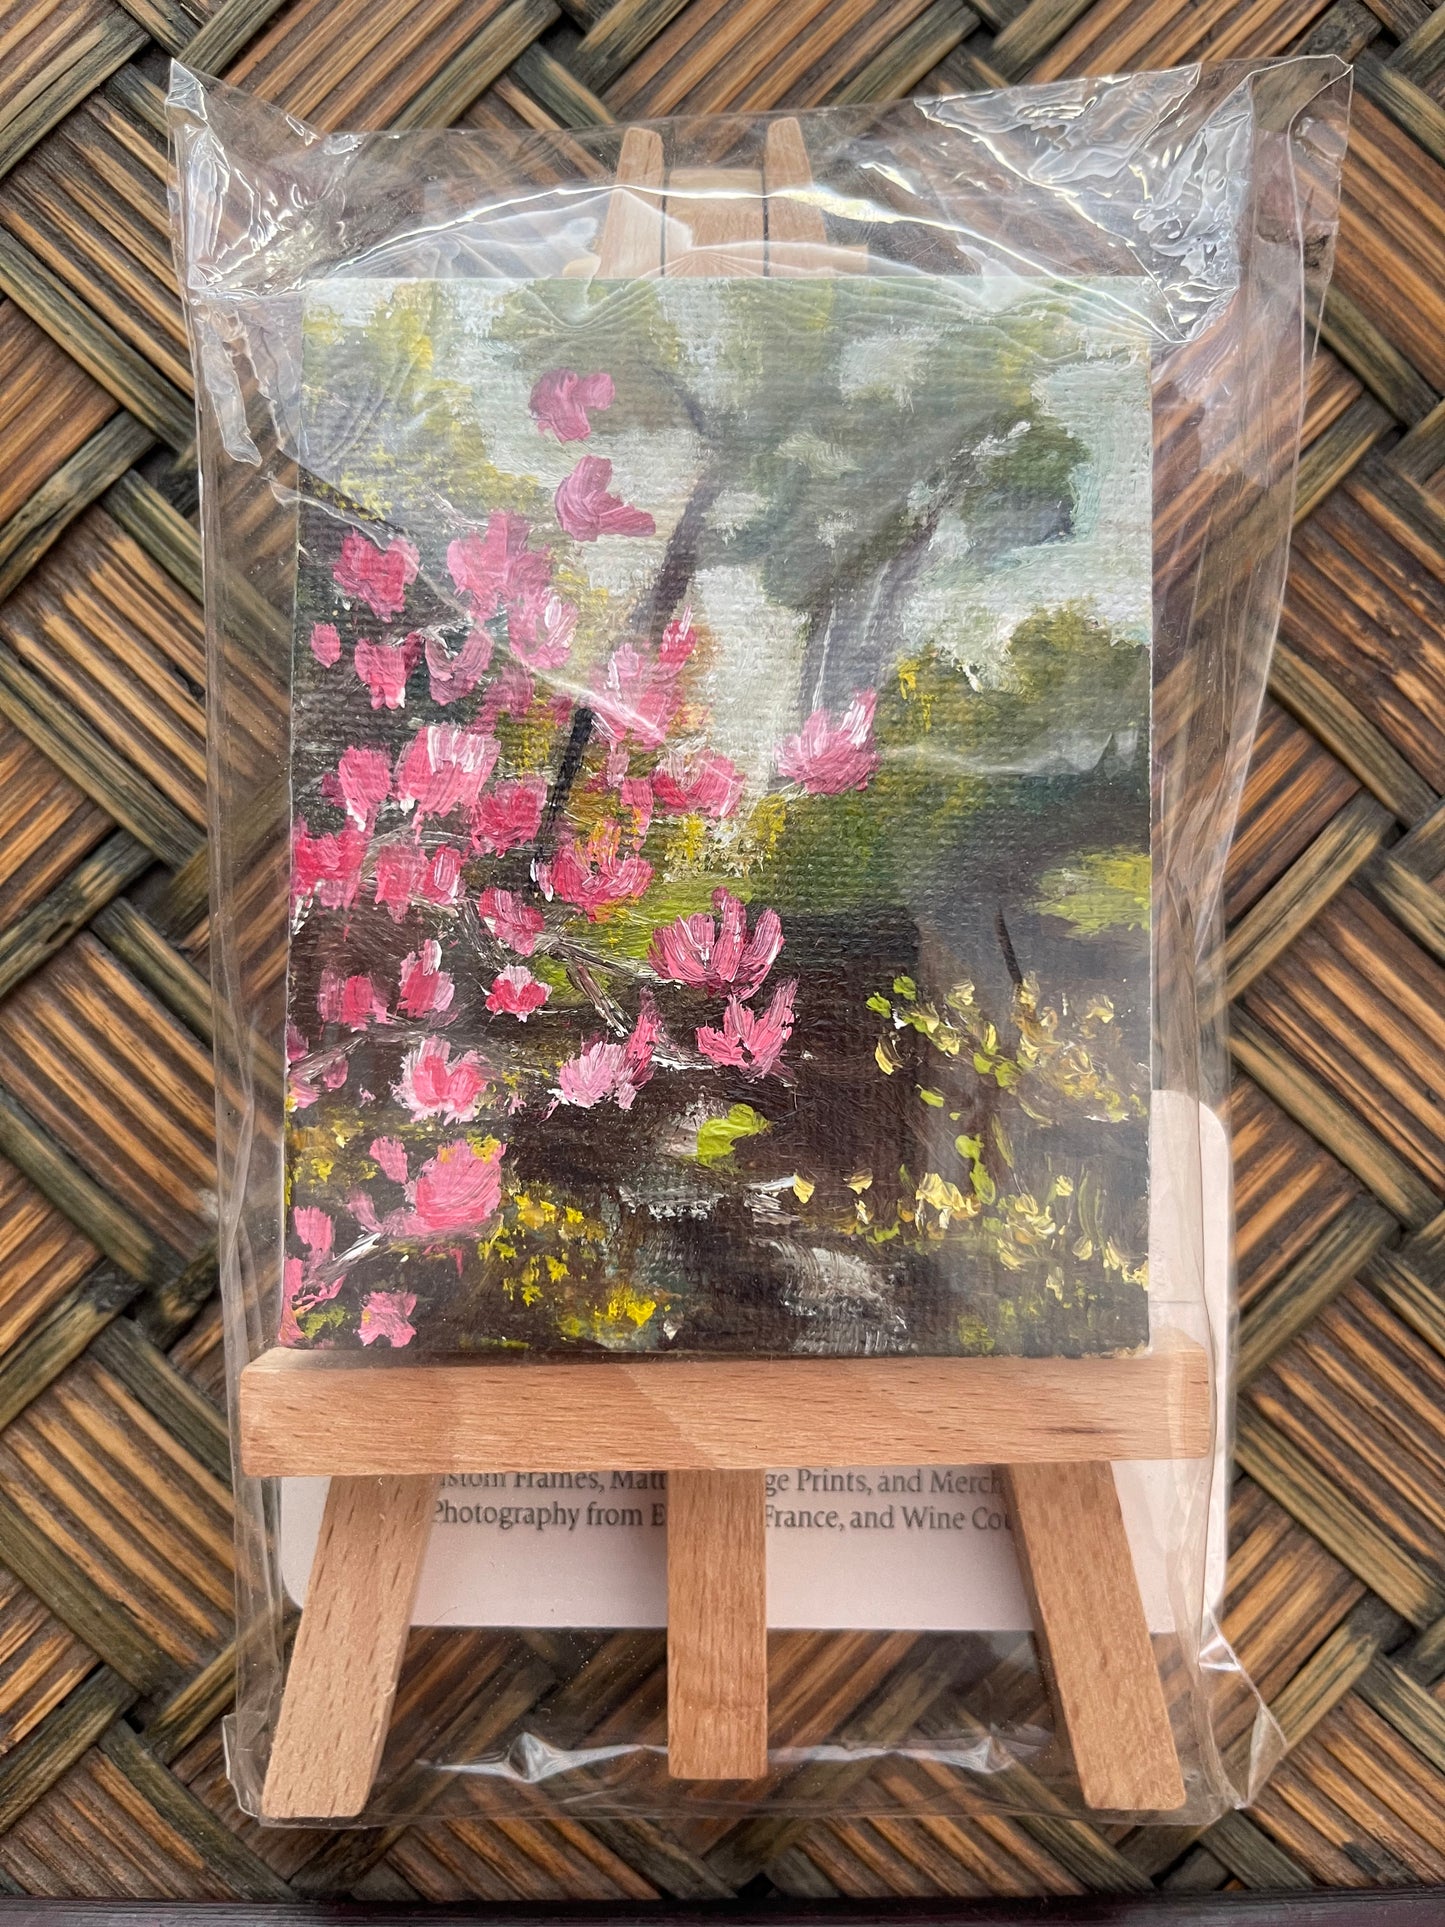 Japanese Magnolias at Descanso Gardens-Original Miniature Oil Landscape Painting with Stand